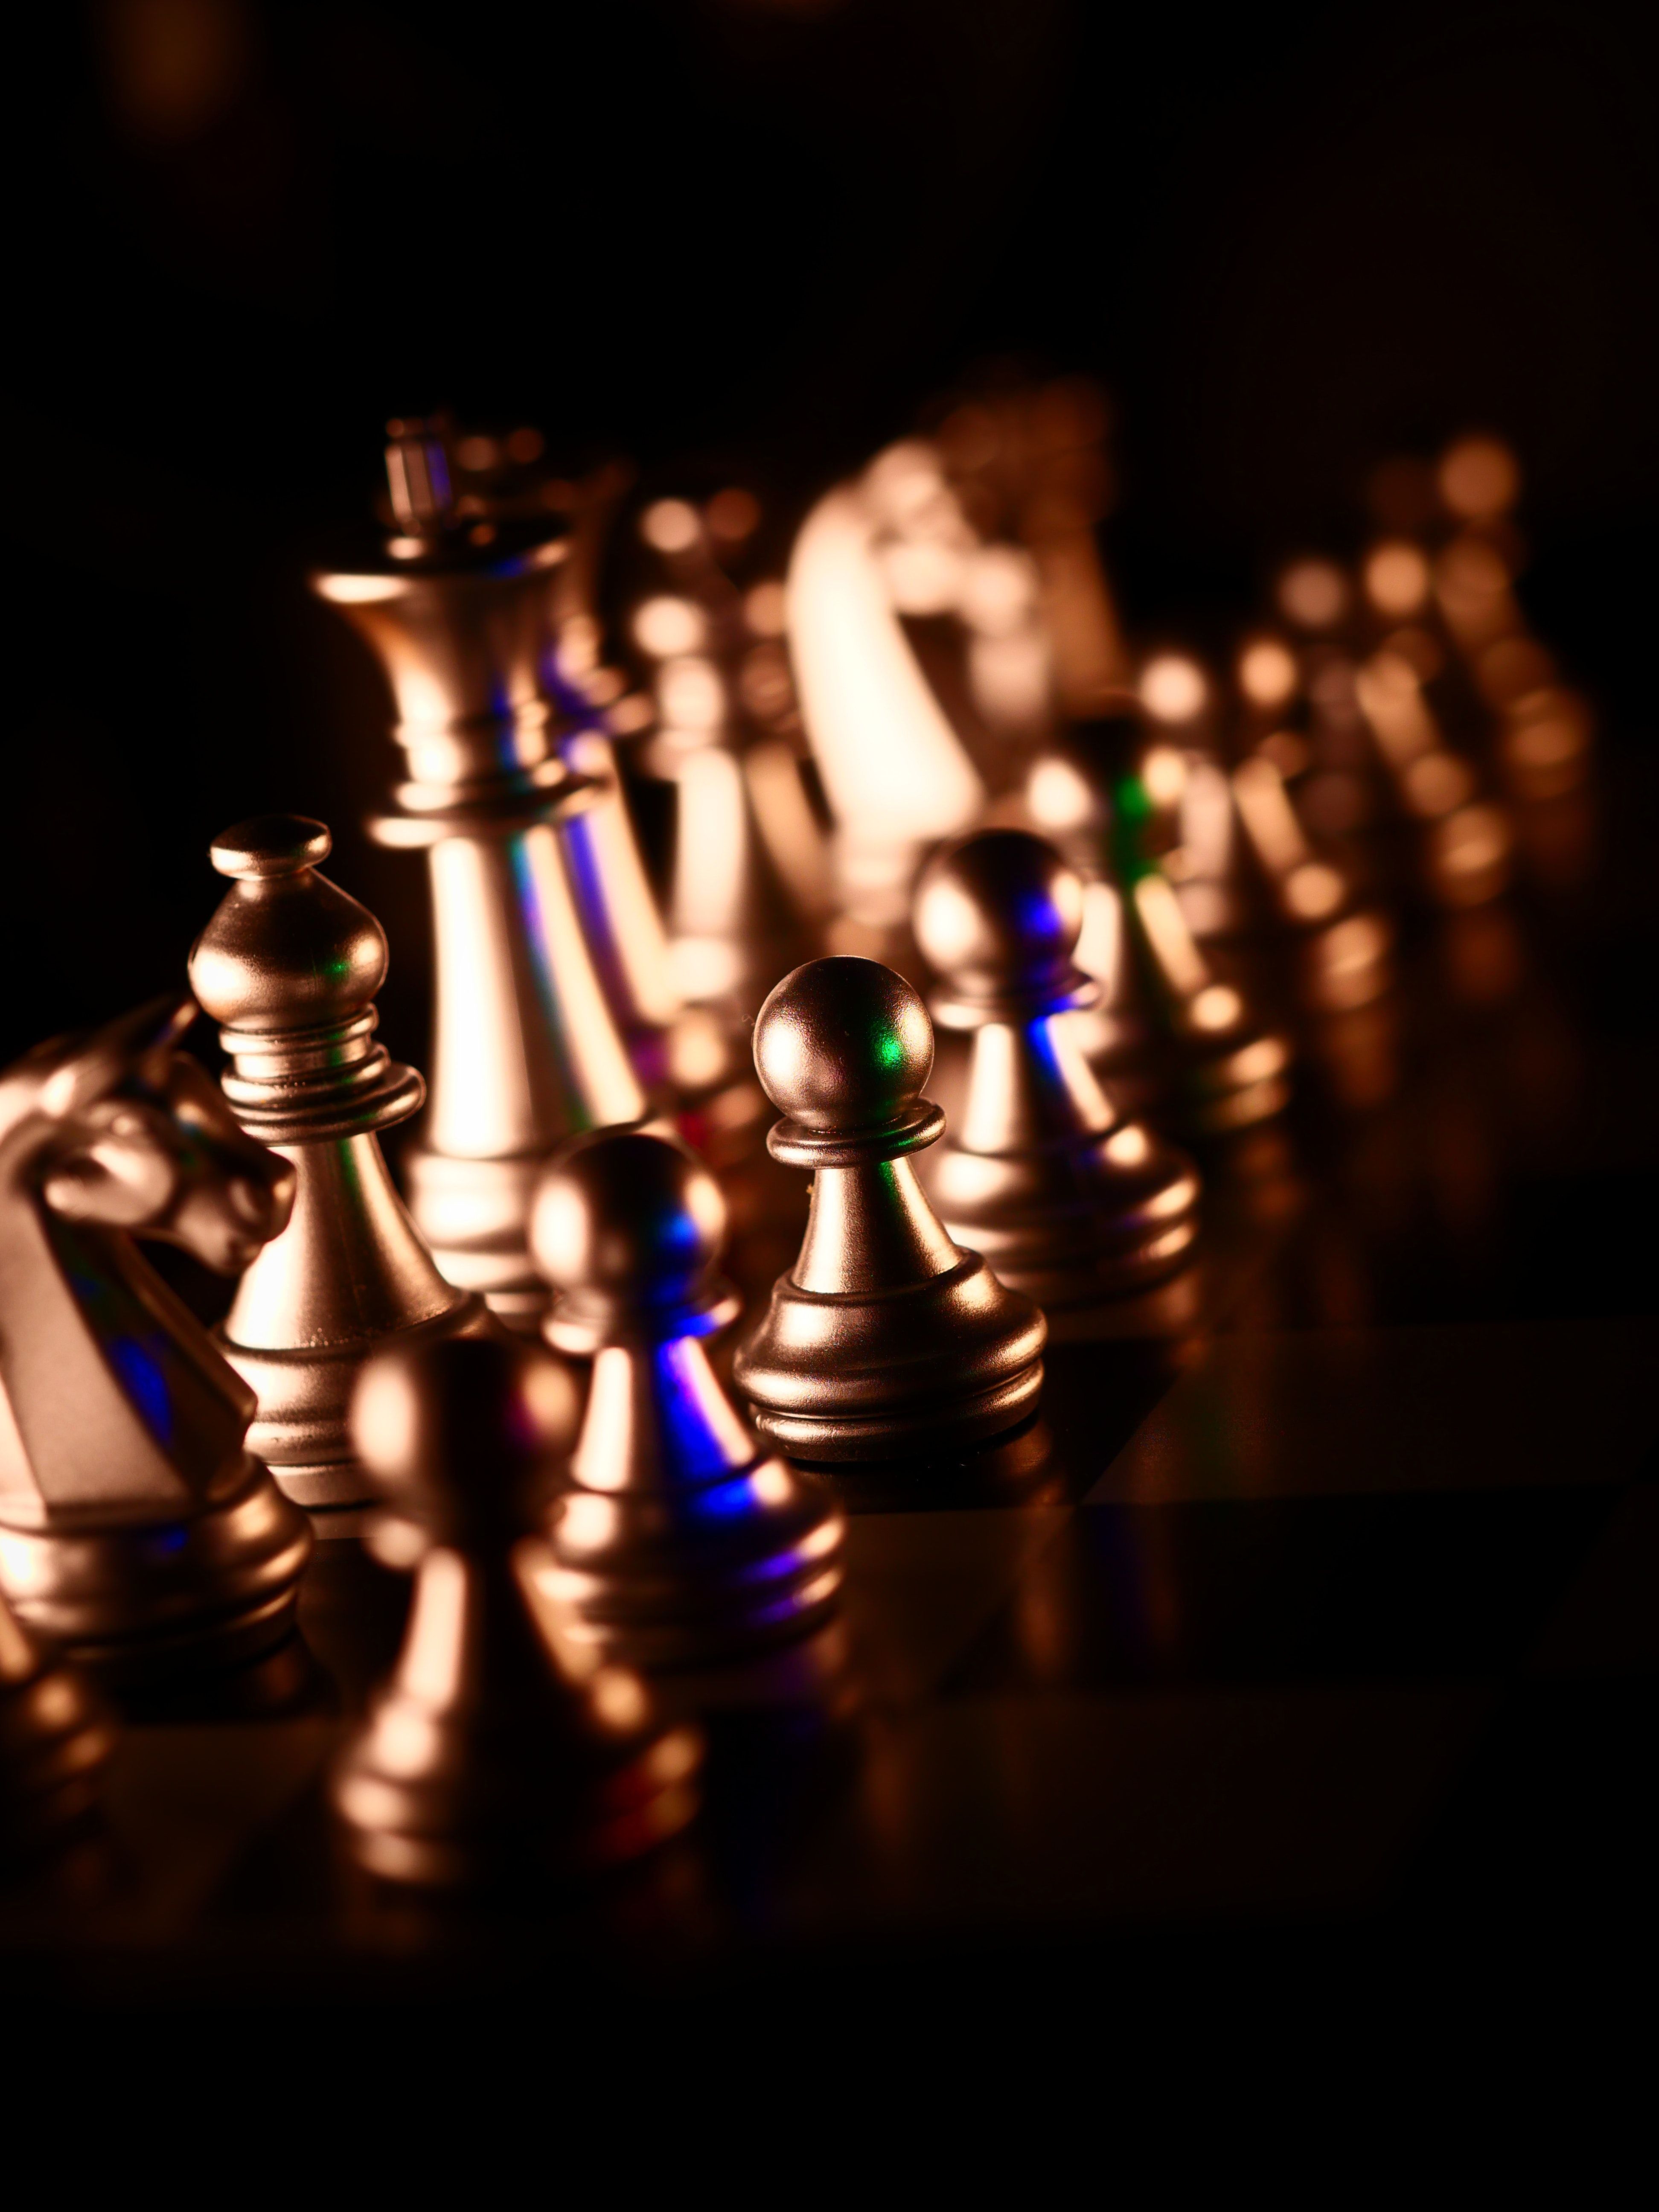 A chess board with silver chess pieces. - Chess